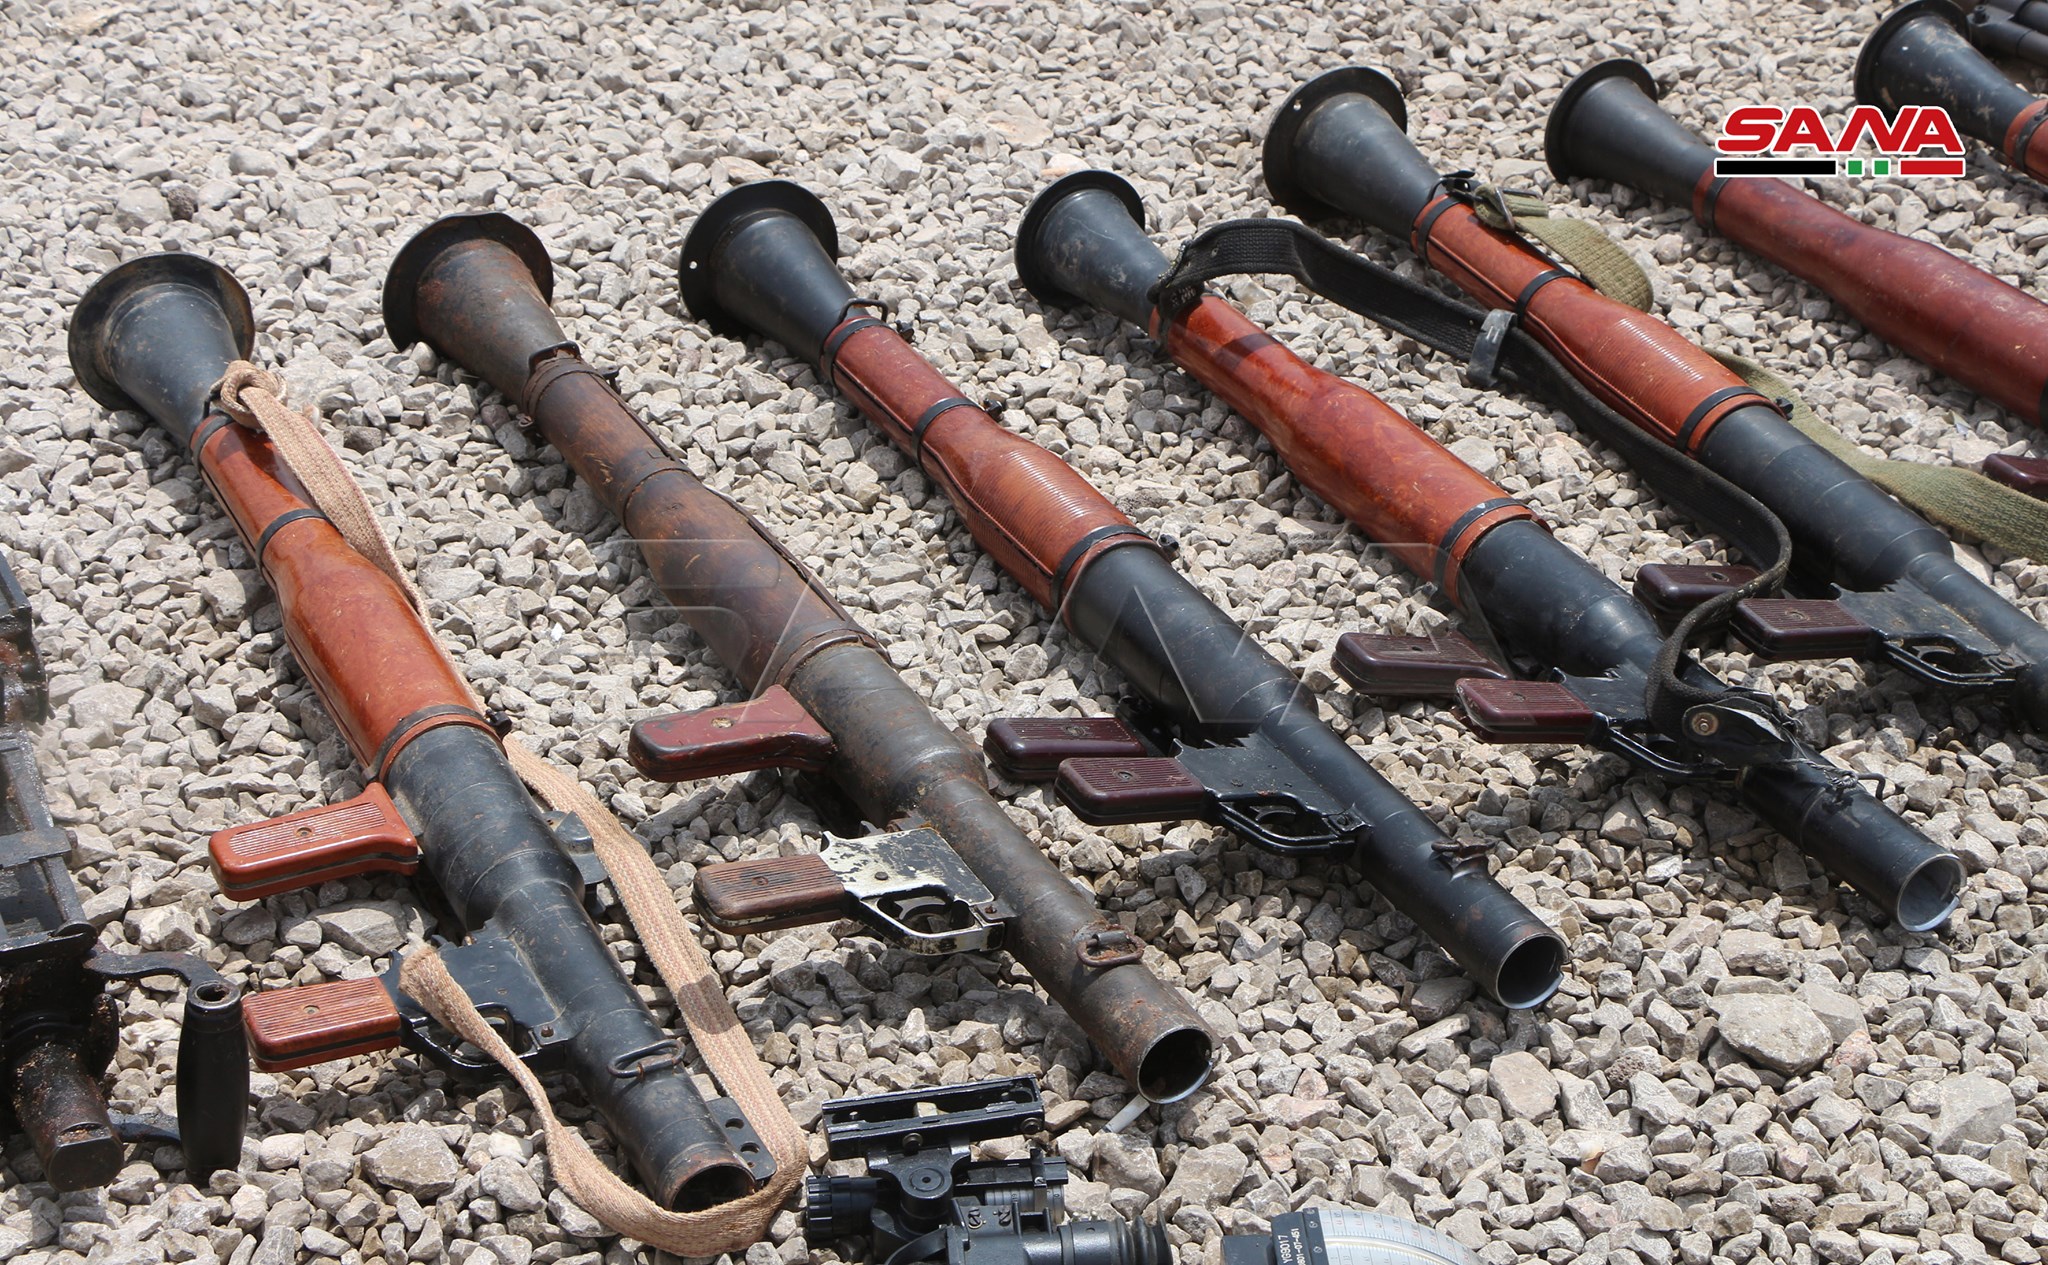 Syrian Army Uncovers Weapons, Including Anti-Aircraft Missiles, In Western Daraa (Photos)